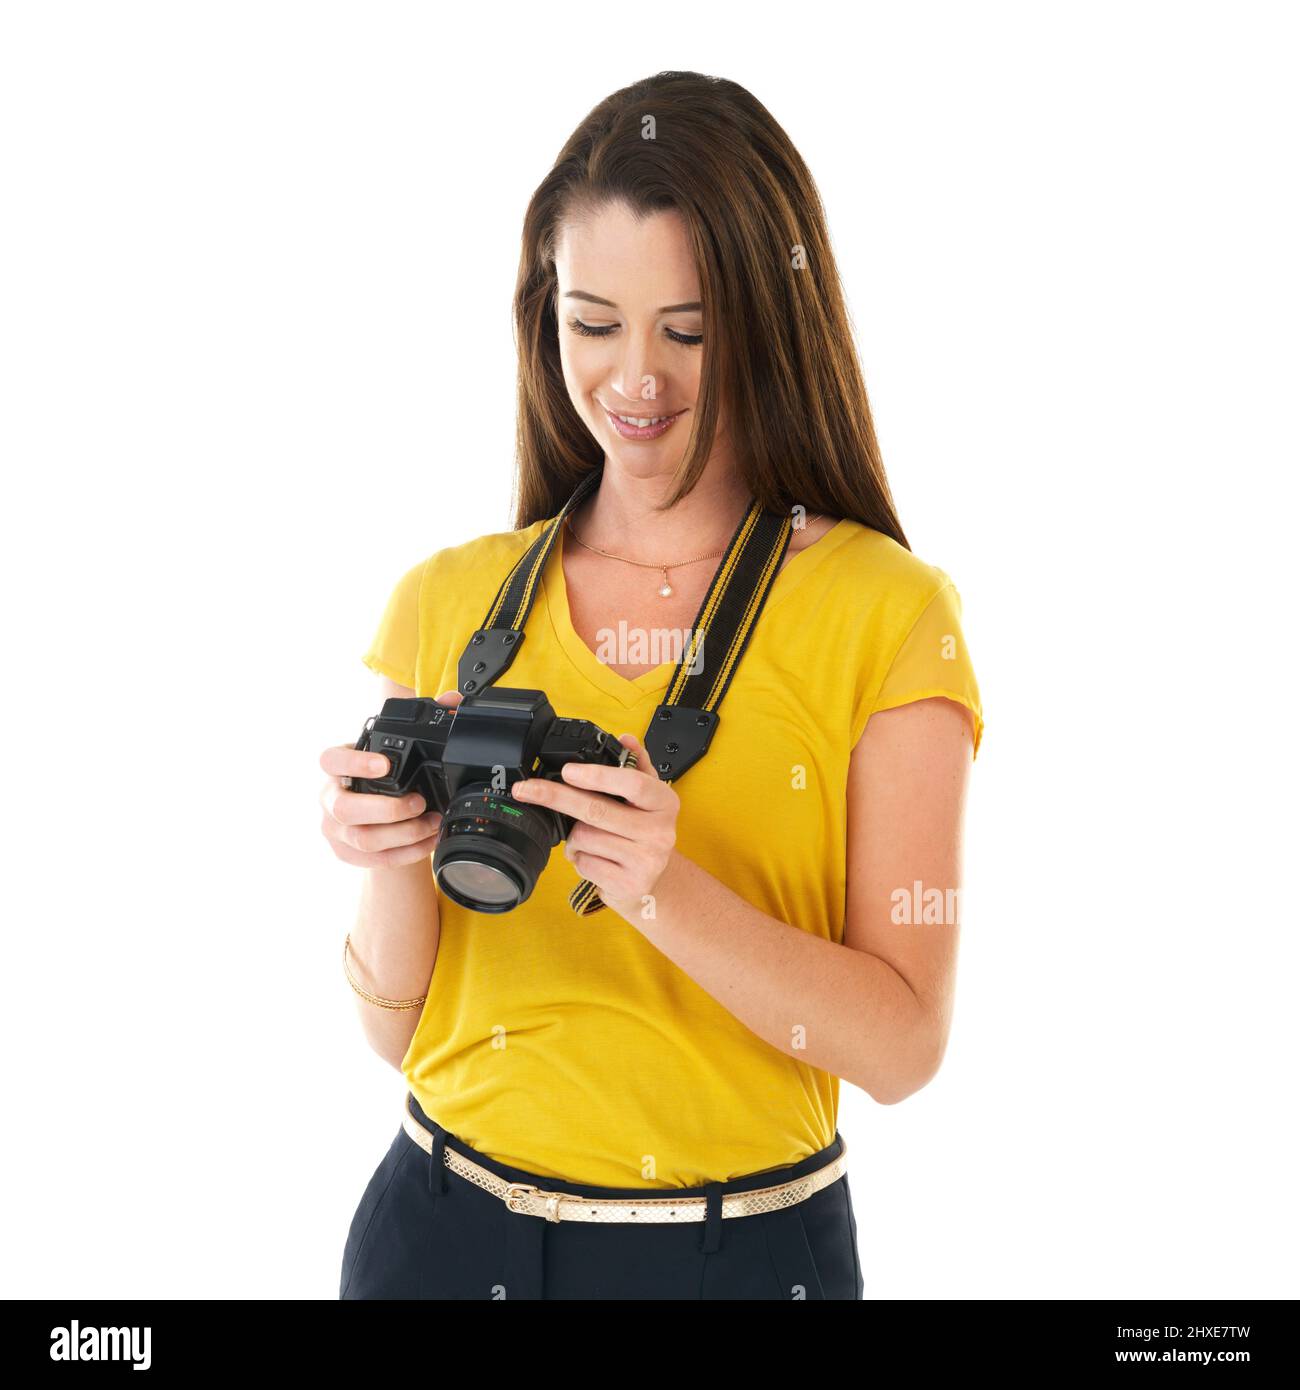 Shes quite impressed with the shots she got. Shot of a young woman holding her camera against a white background. Stock Photo